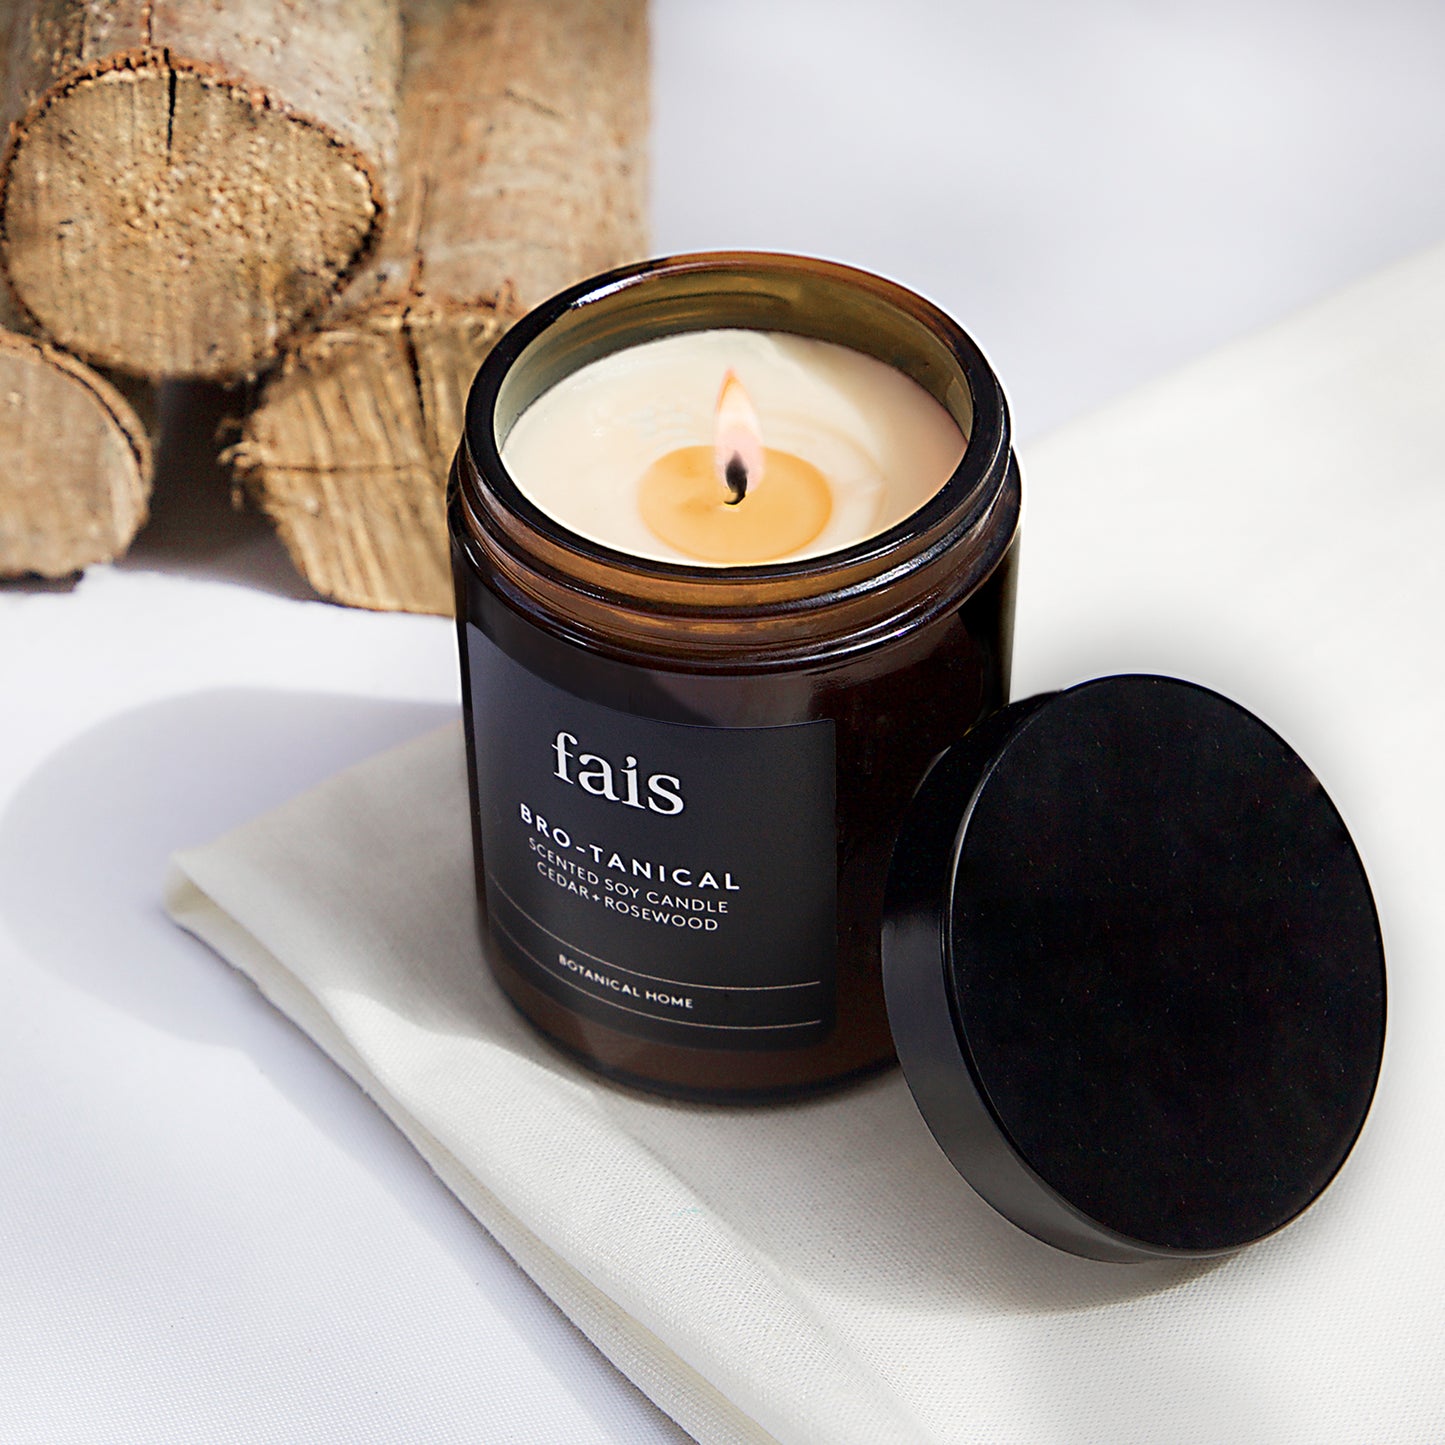 Bro-tanical Scented Soy Candle Cedar + Rosewood